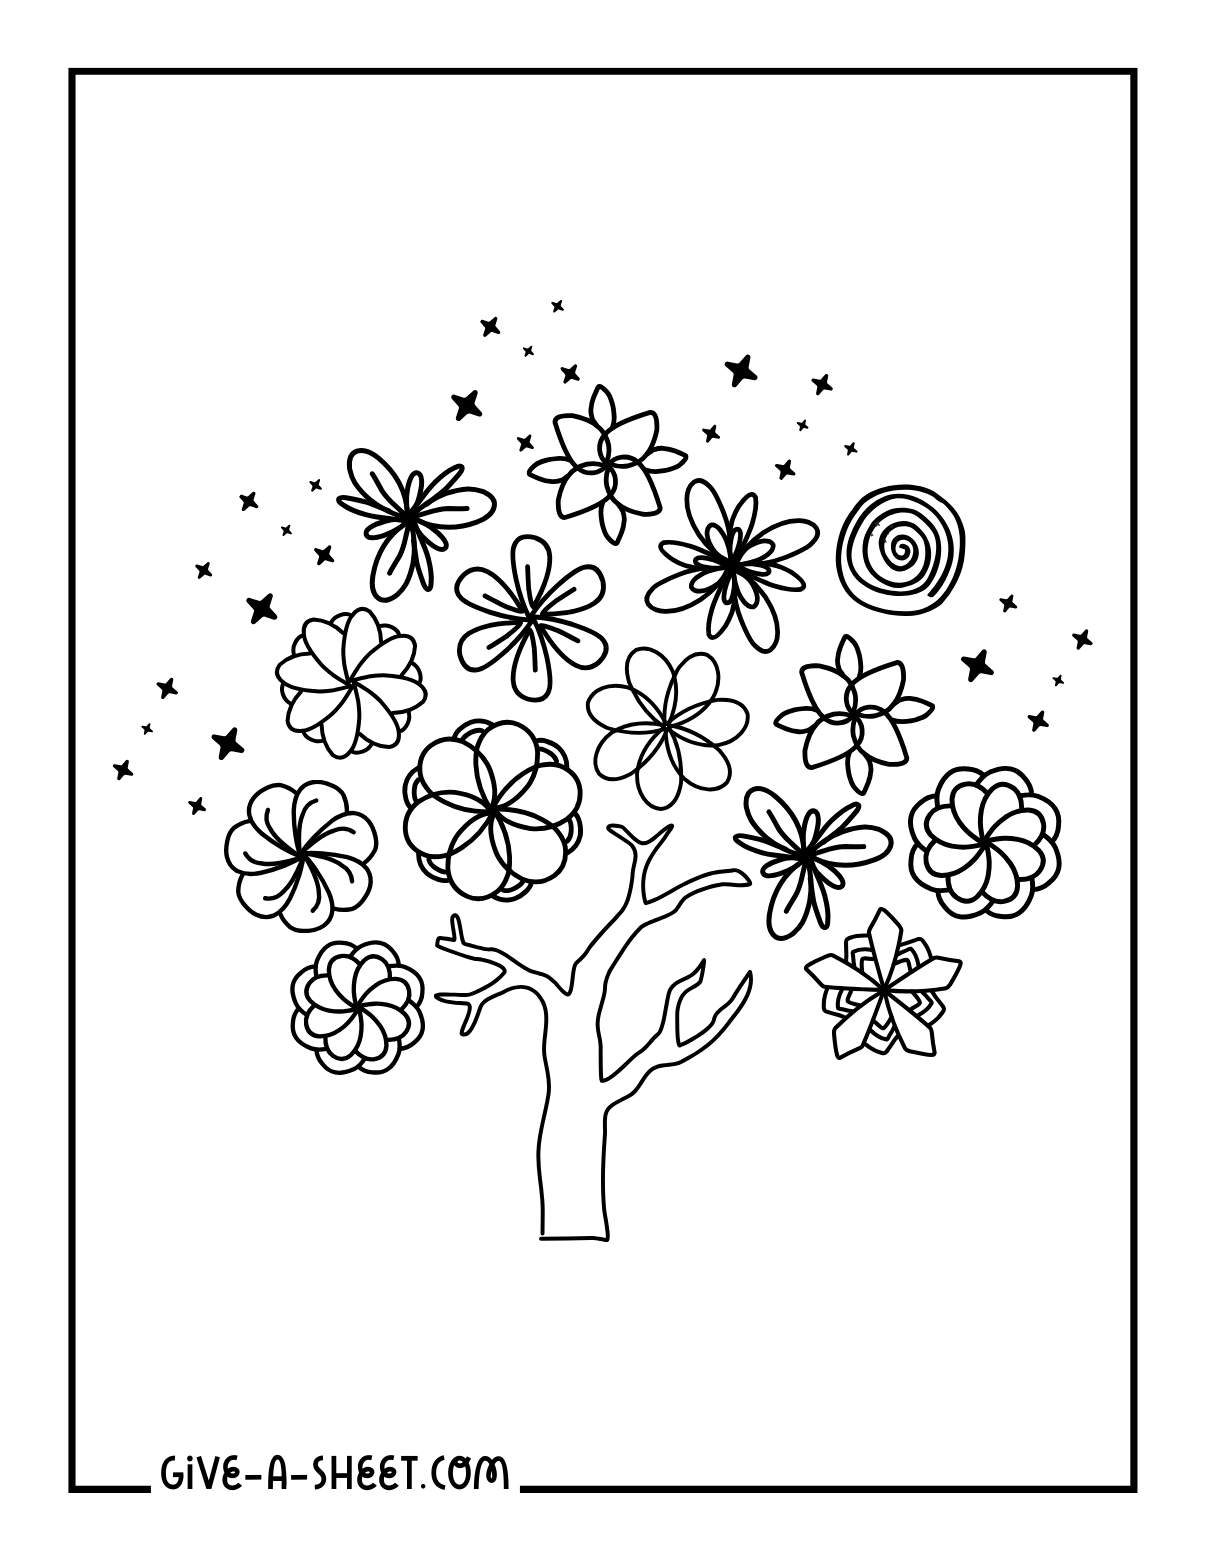 Simple mandala tree illustrations coloring page for kids.